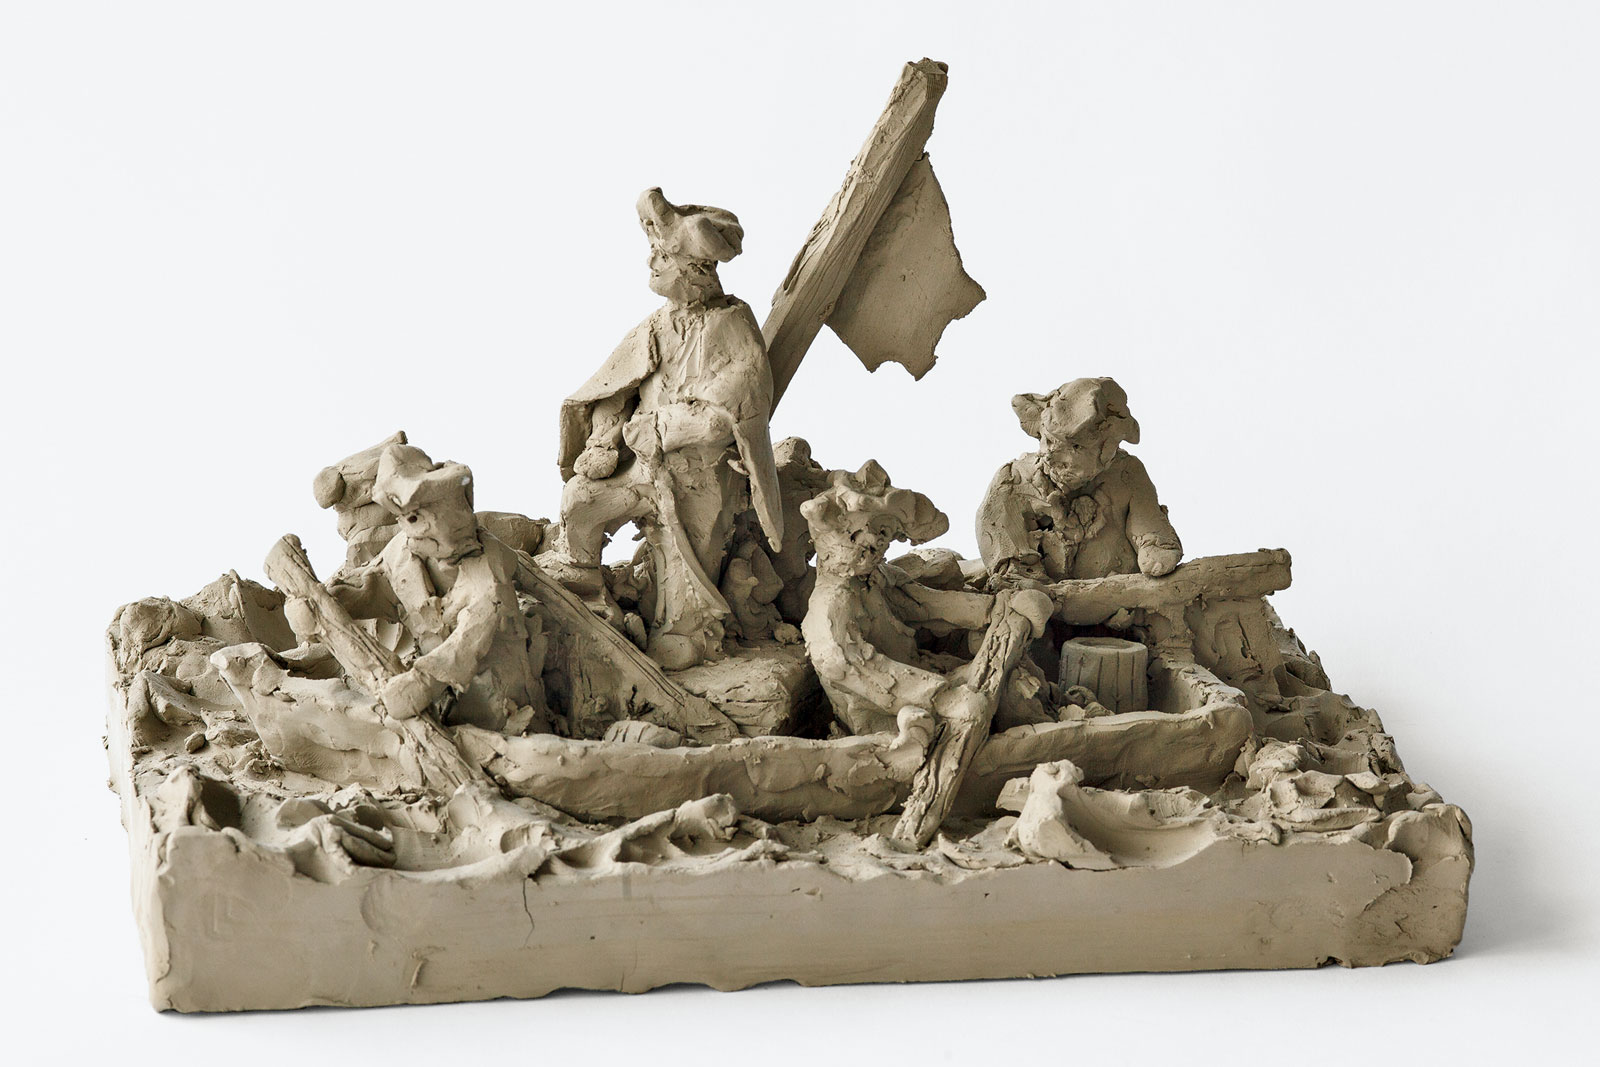 Peter Fischli and David Weiss: George Washington Crossing the Delaware (from "Suddenly This Overview"), 1981-present 